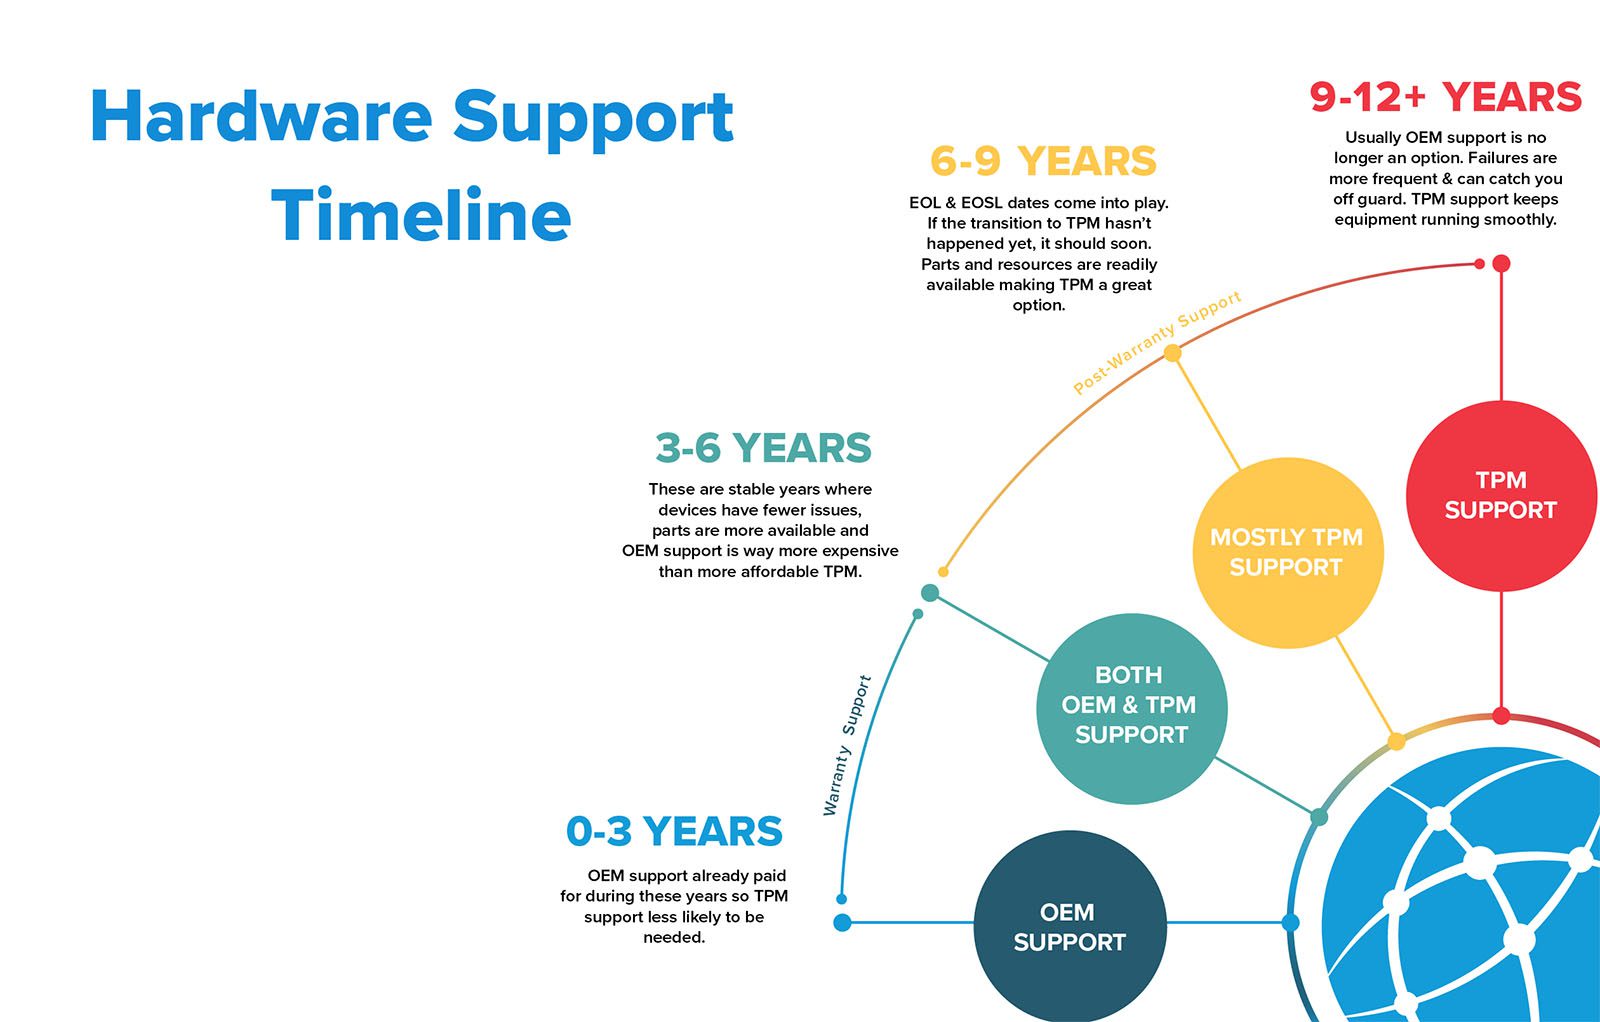 Hardware support timeline showing OEM support from 0-3 years, both OEM & TPM support from 3-6 years, mostly TPM support from 6-9 years and TPM support from 9-12 years and beyond